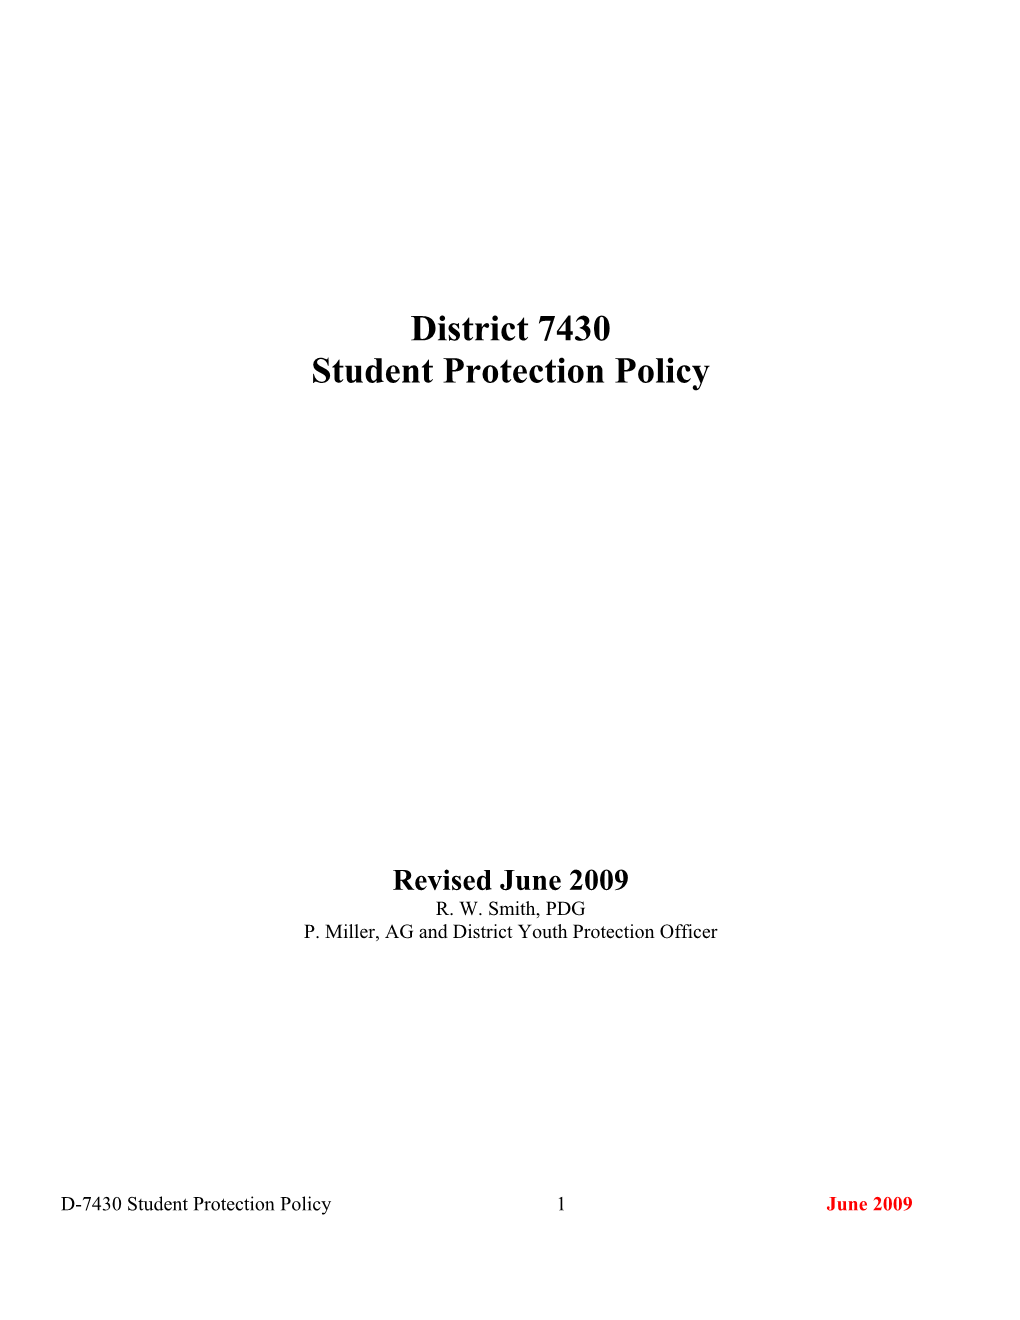 Student Protection Policy